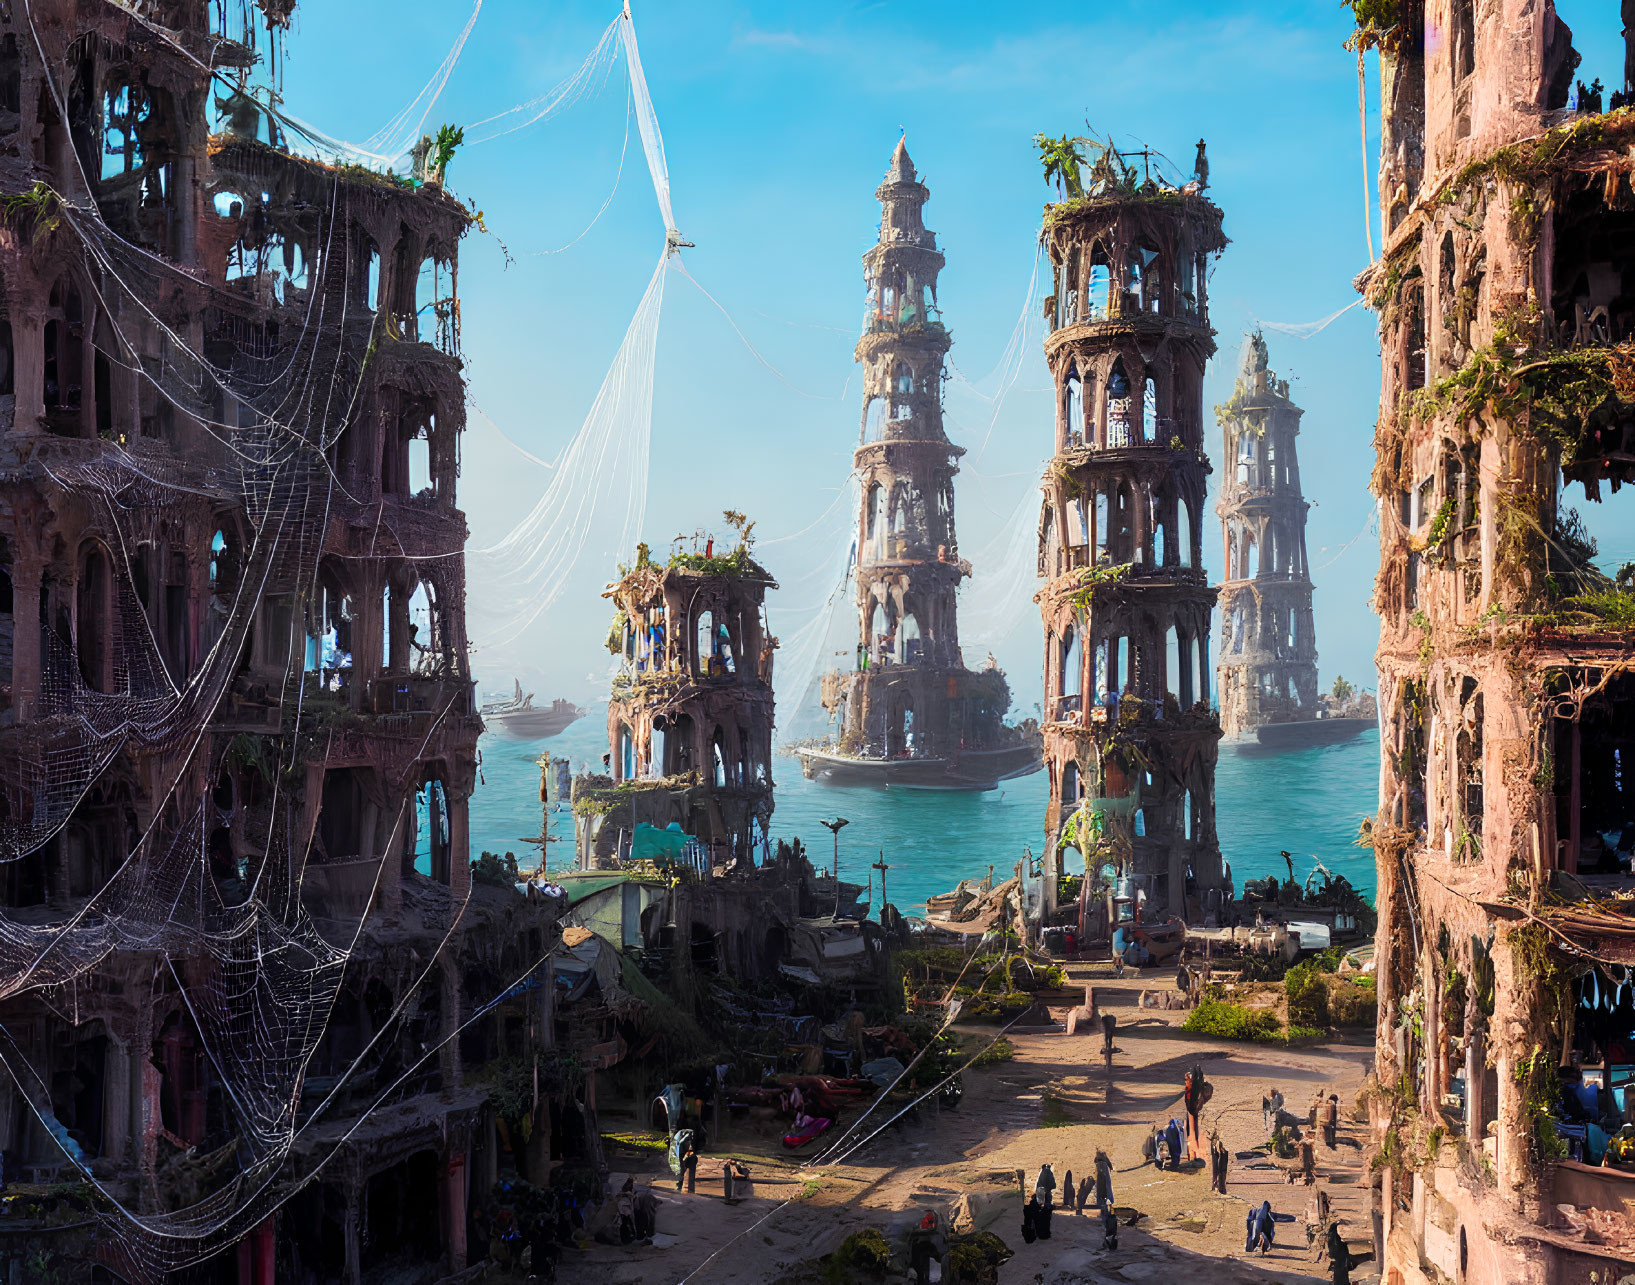 Futuristic cityscape with towering structures, clear sky, people, and ships.